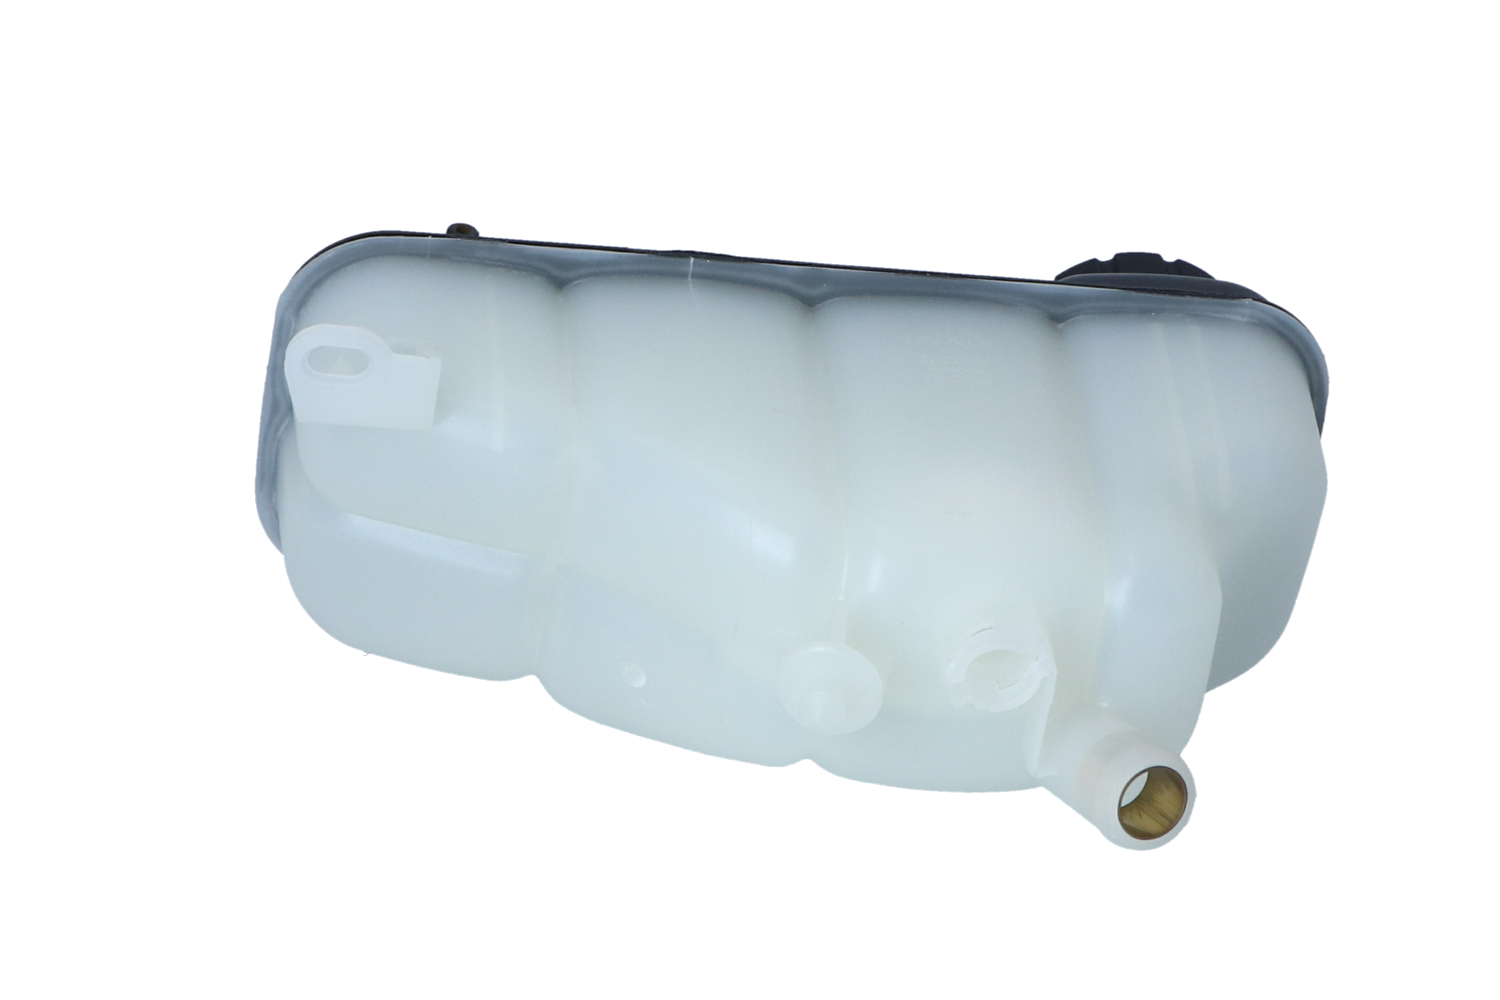 Mercedes G-Class Coolant recovery reservoir 16633688 NRF 454044 online buy